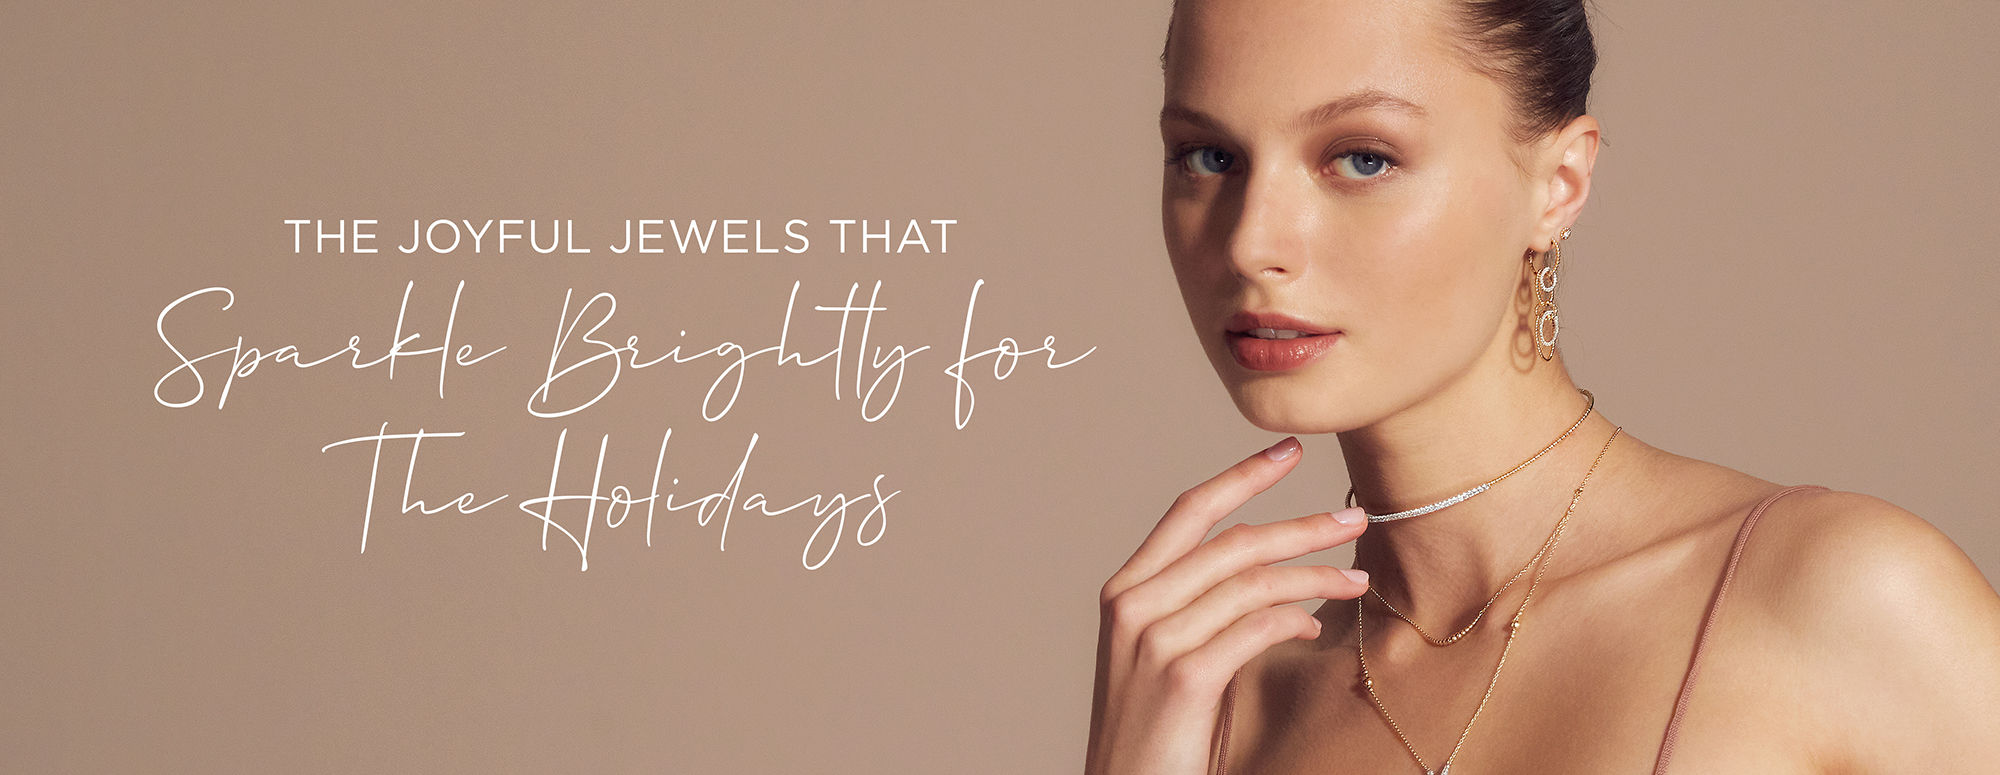 The Joyful Jewels That Sparkle Brightly for The Holidays